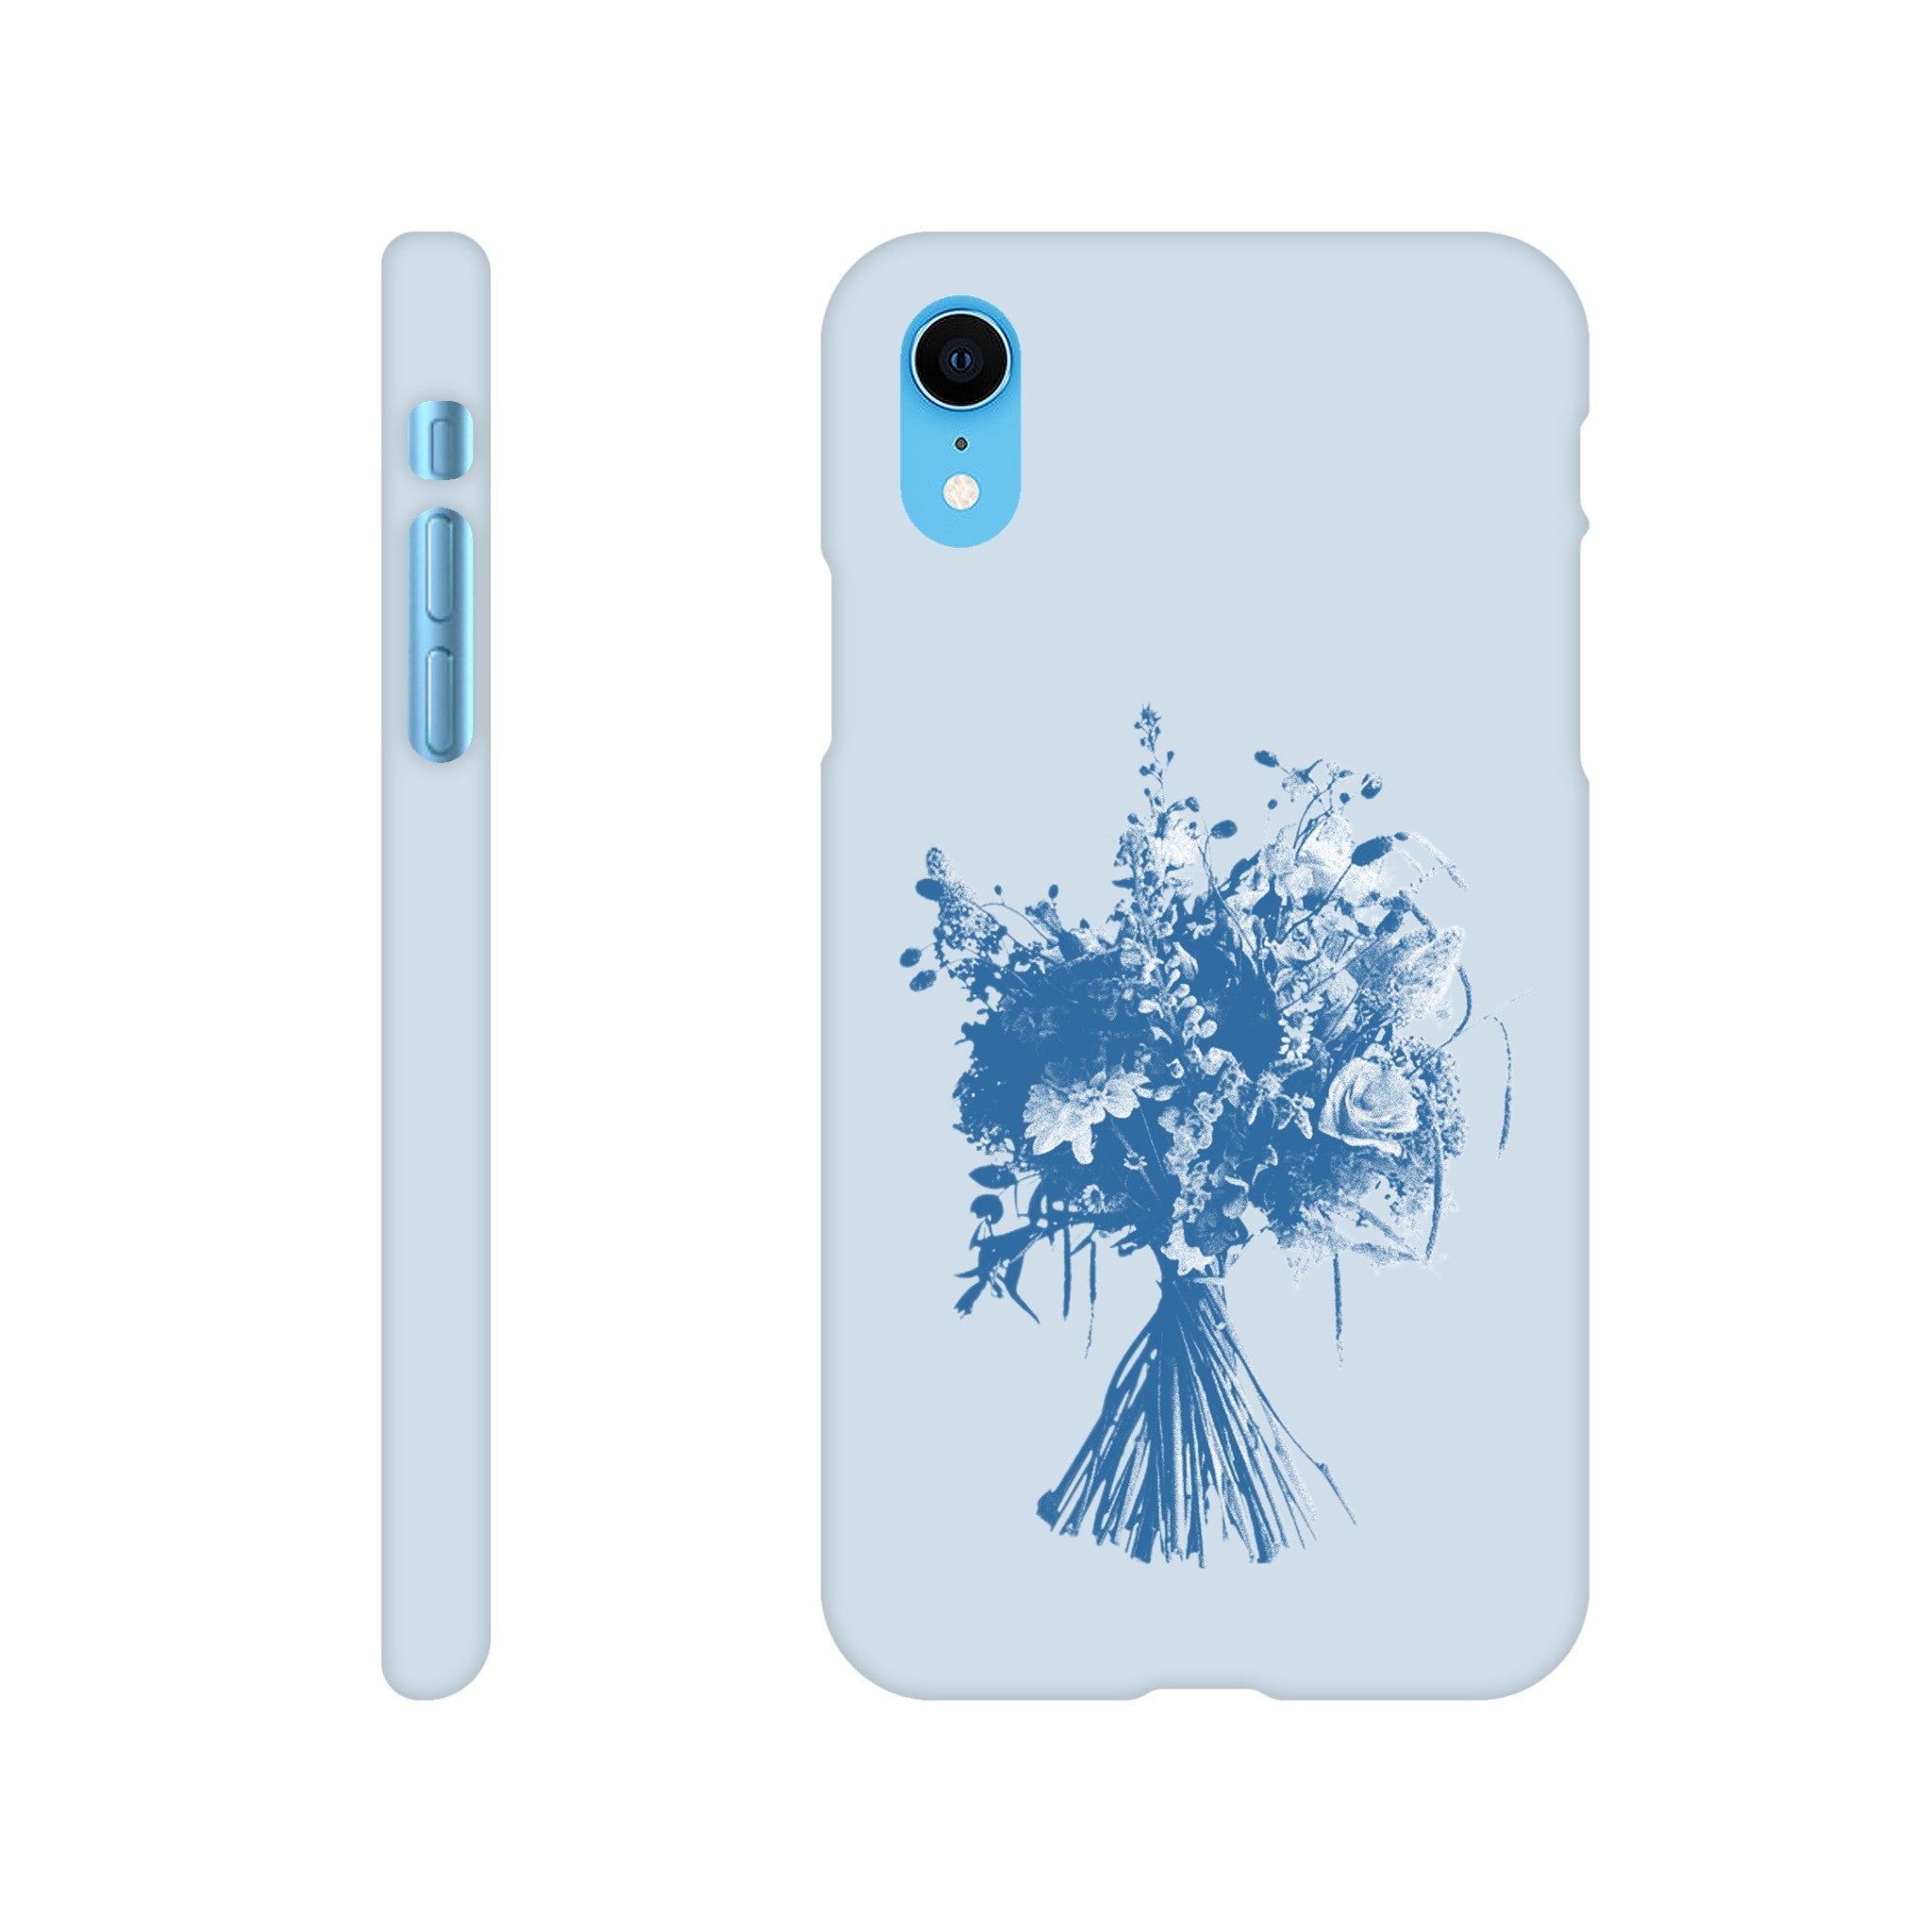 'From the Garden' phone case